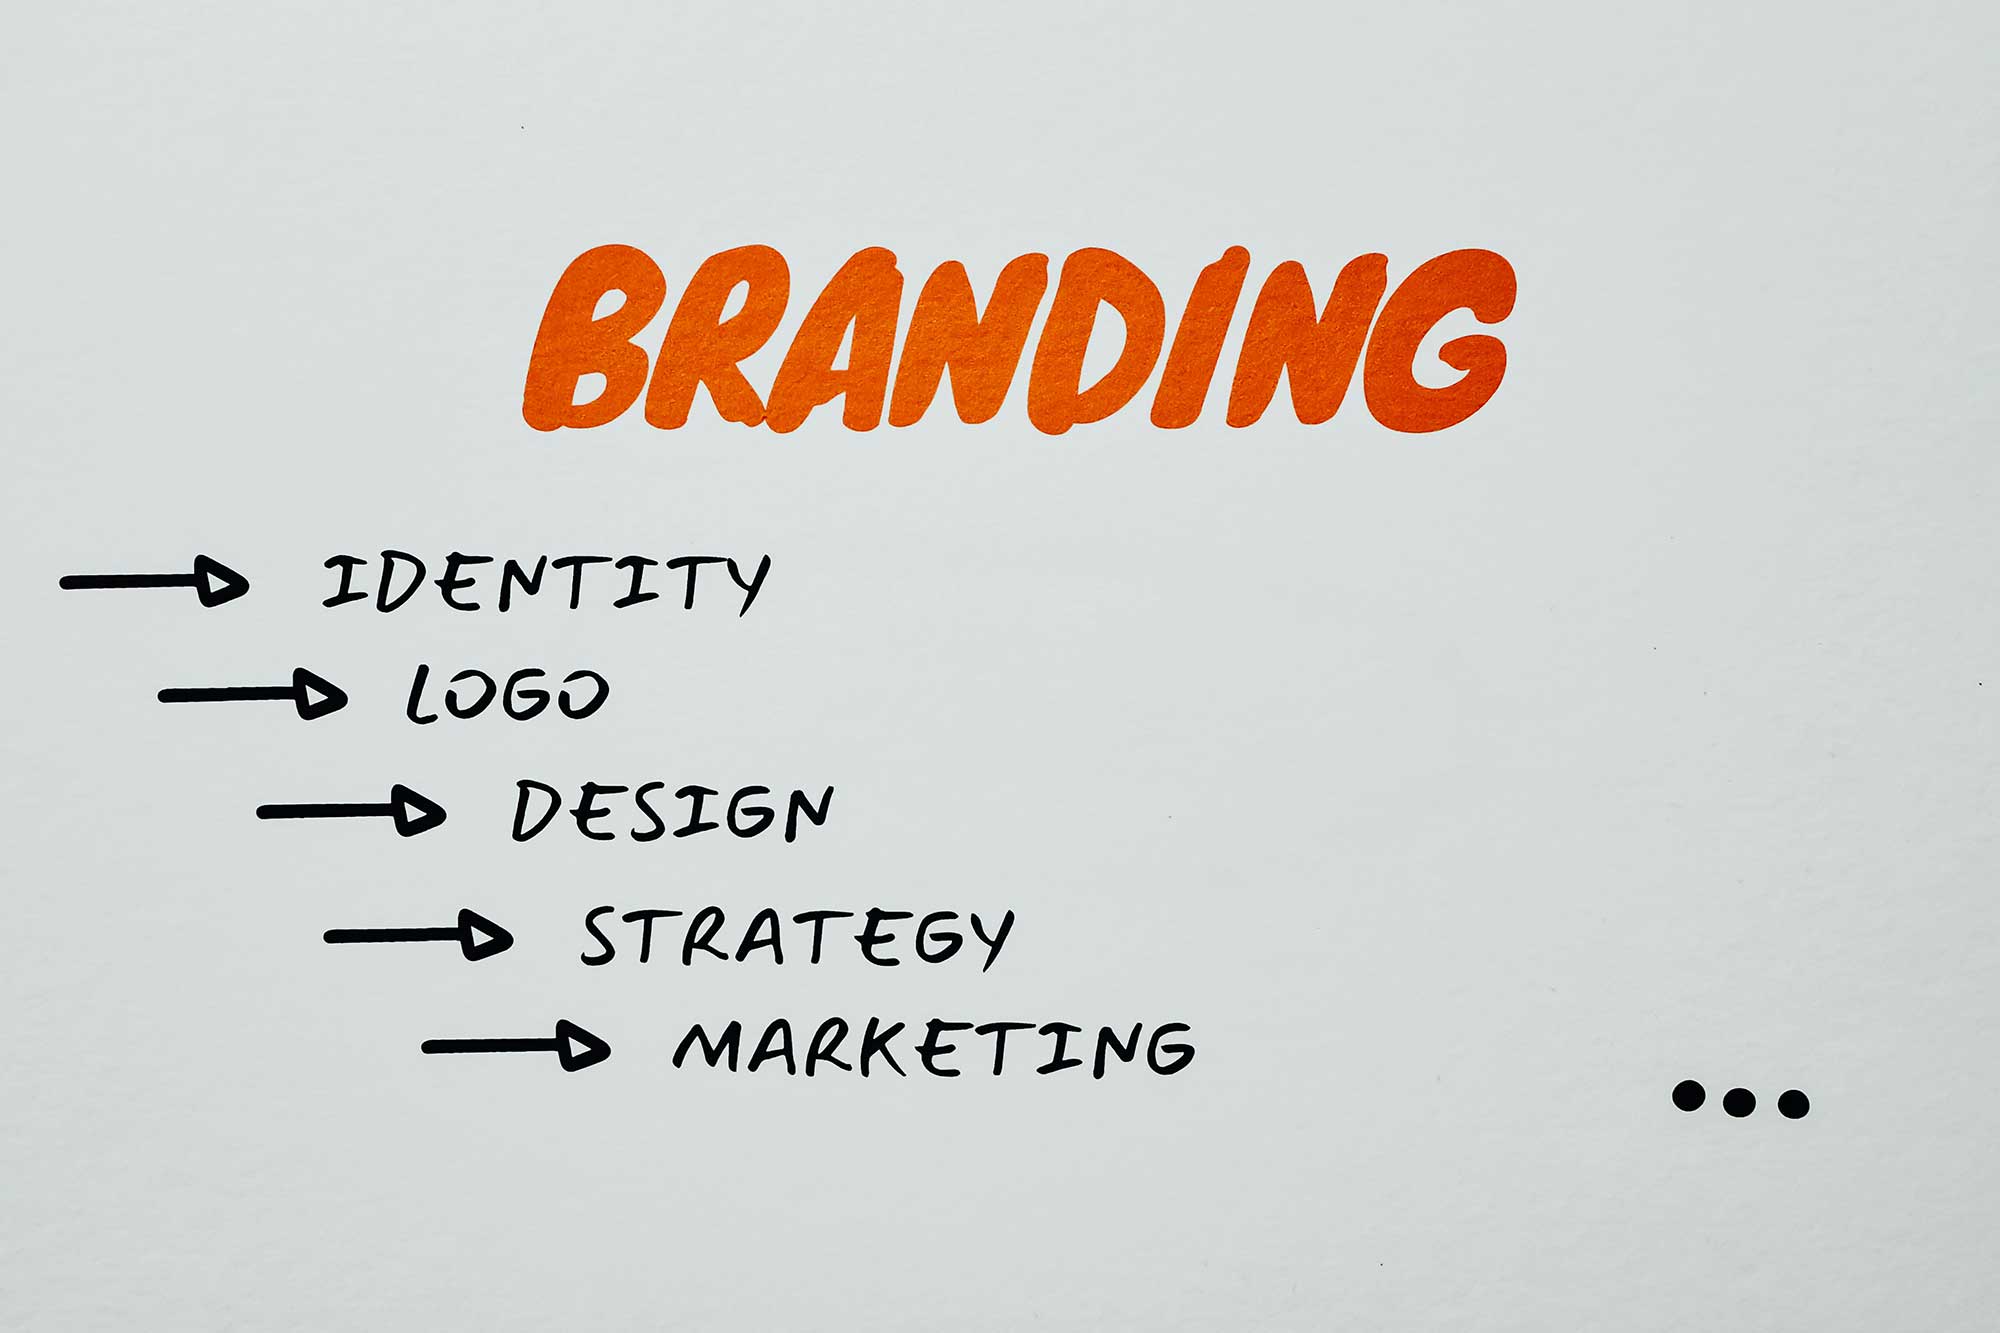 Step to branding include identity, logo, design, strategy, and marketing.